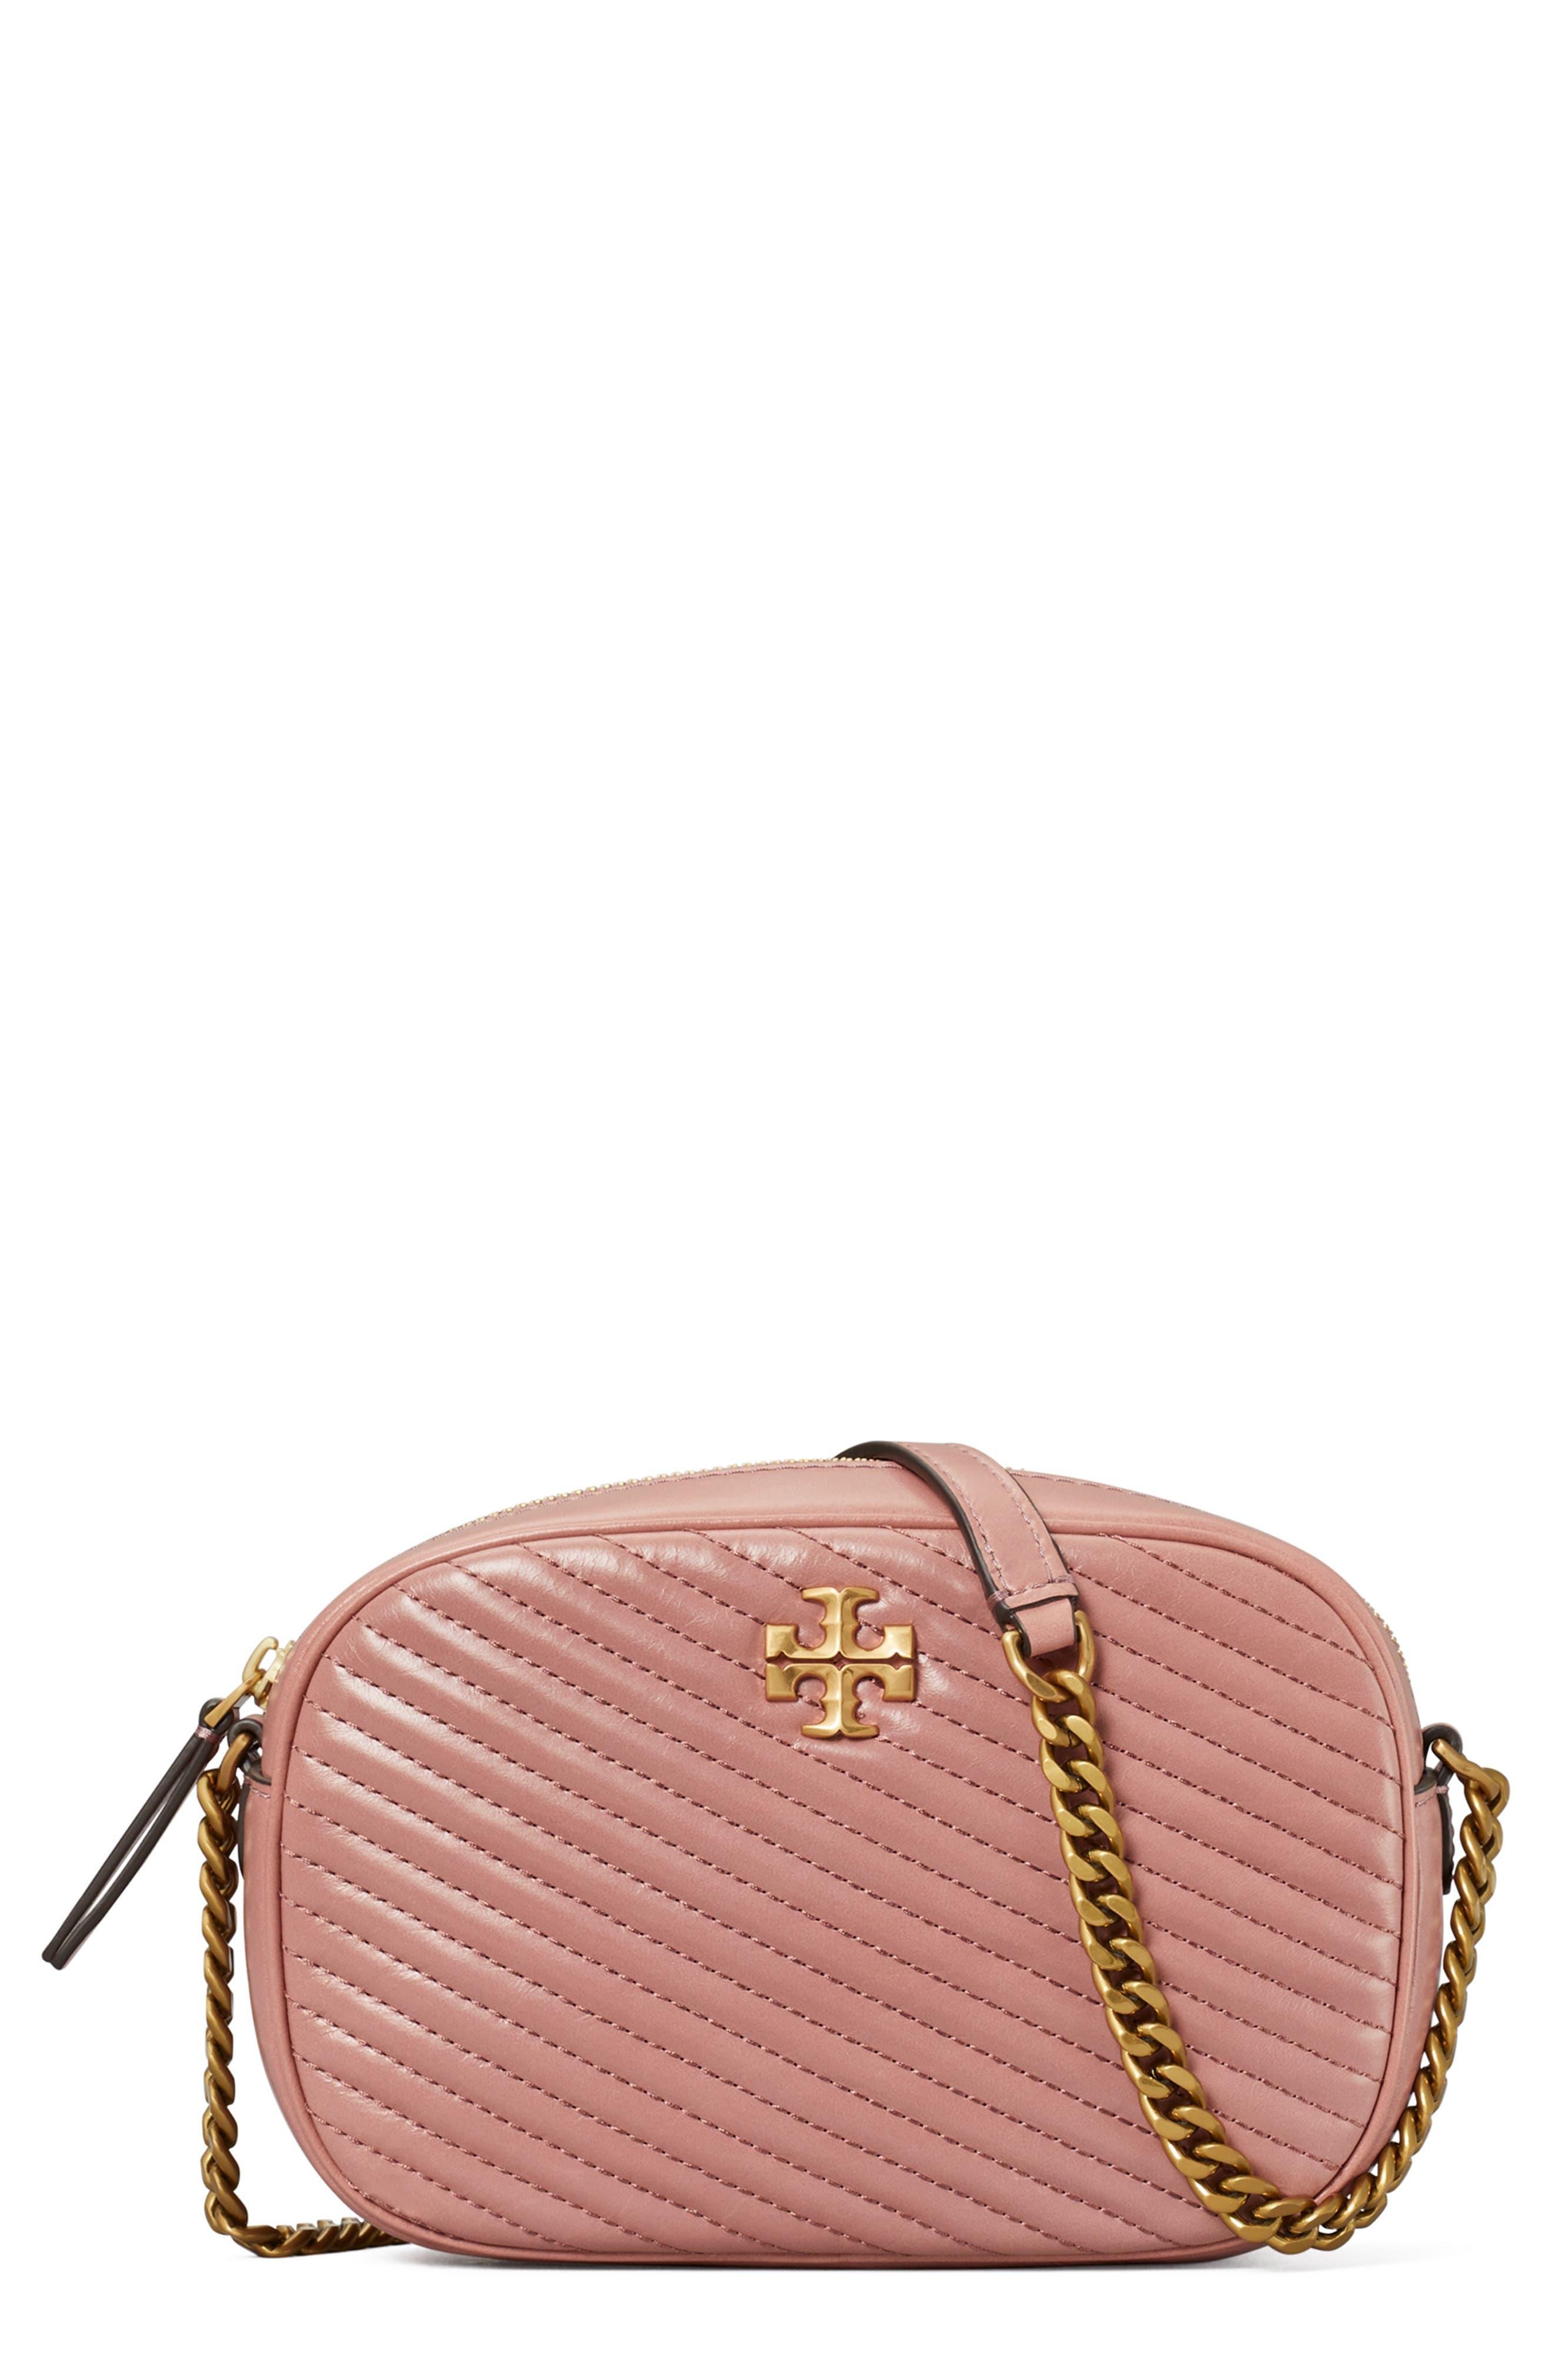 Tory Burch Kira Chevron Quilted Camera Bag in Pink | Lyst